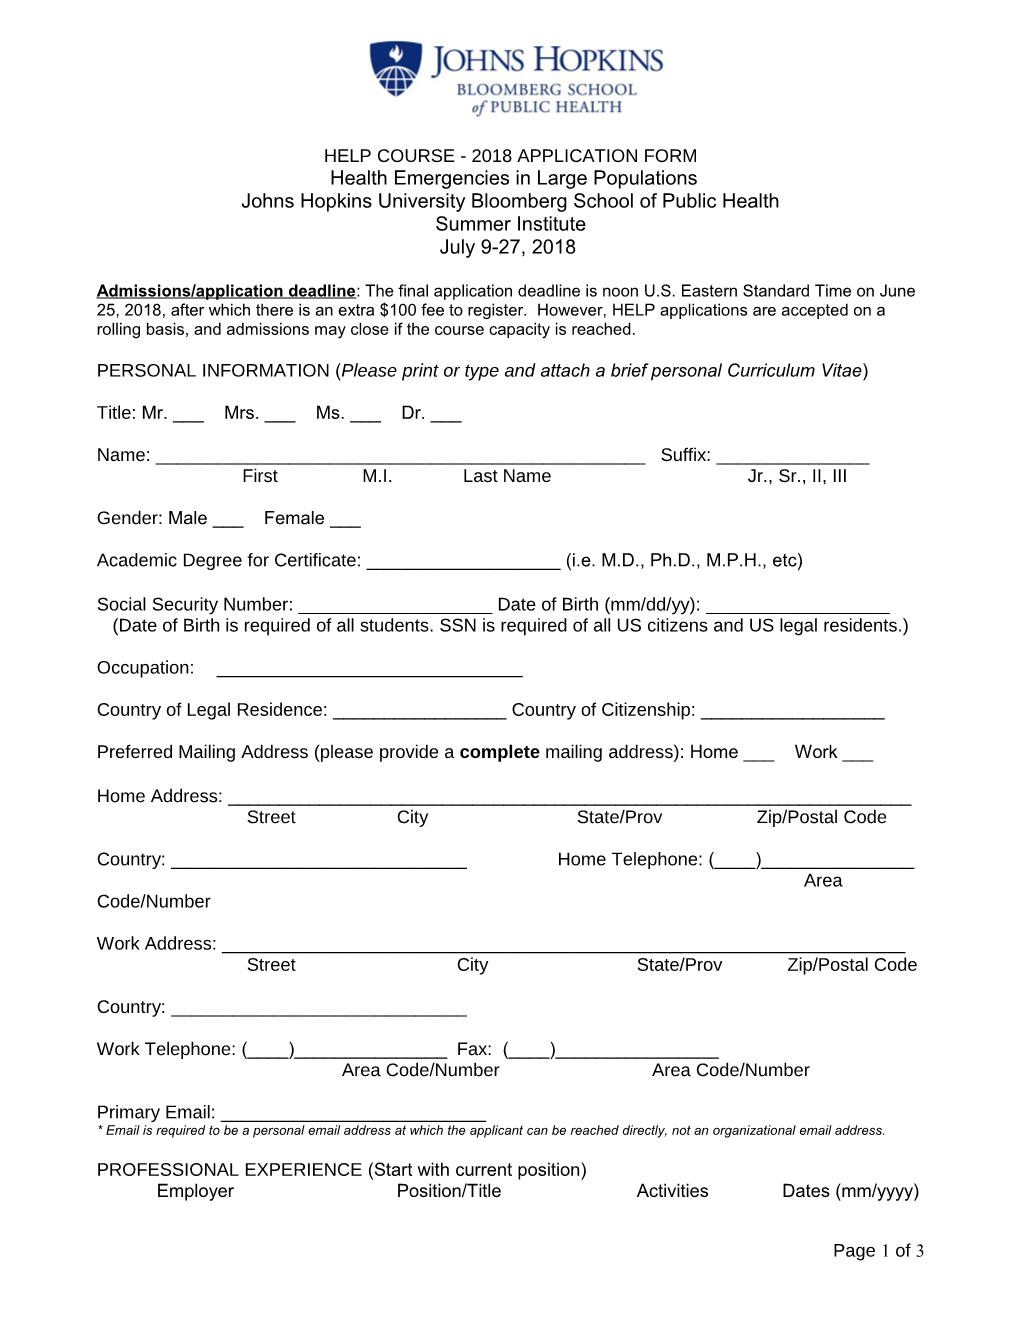 Help Course - 2018 Application Form